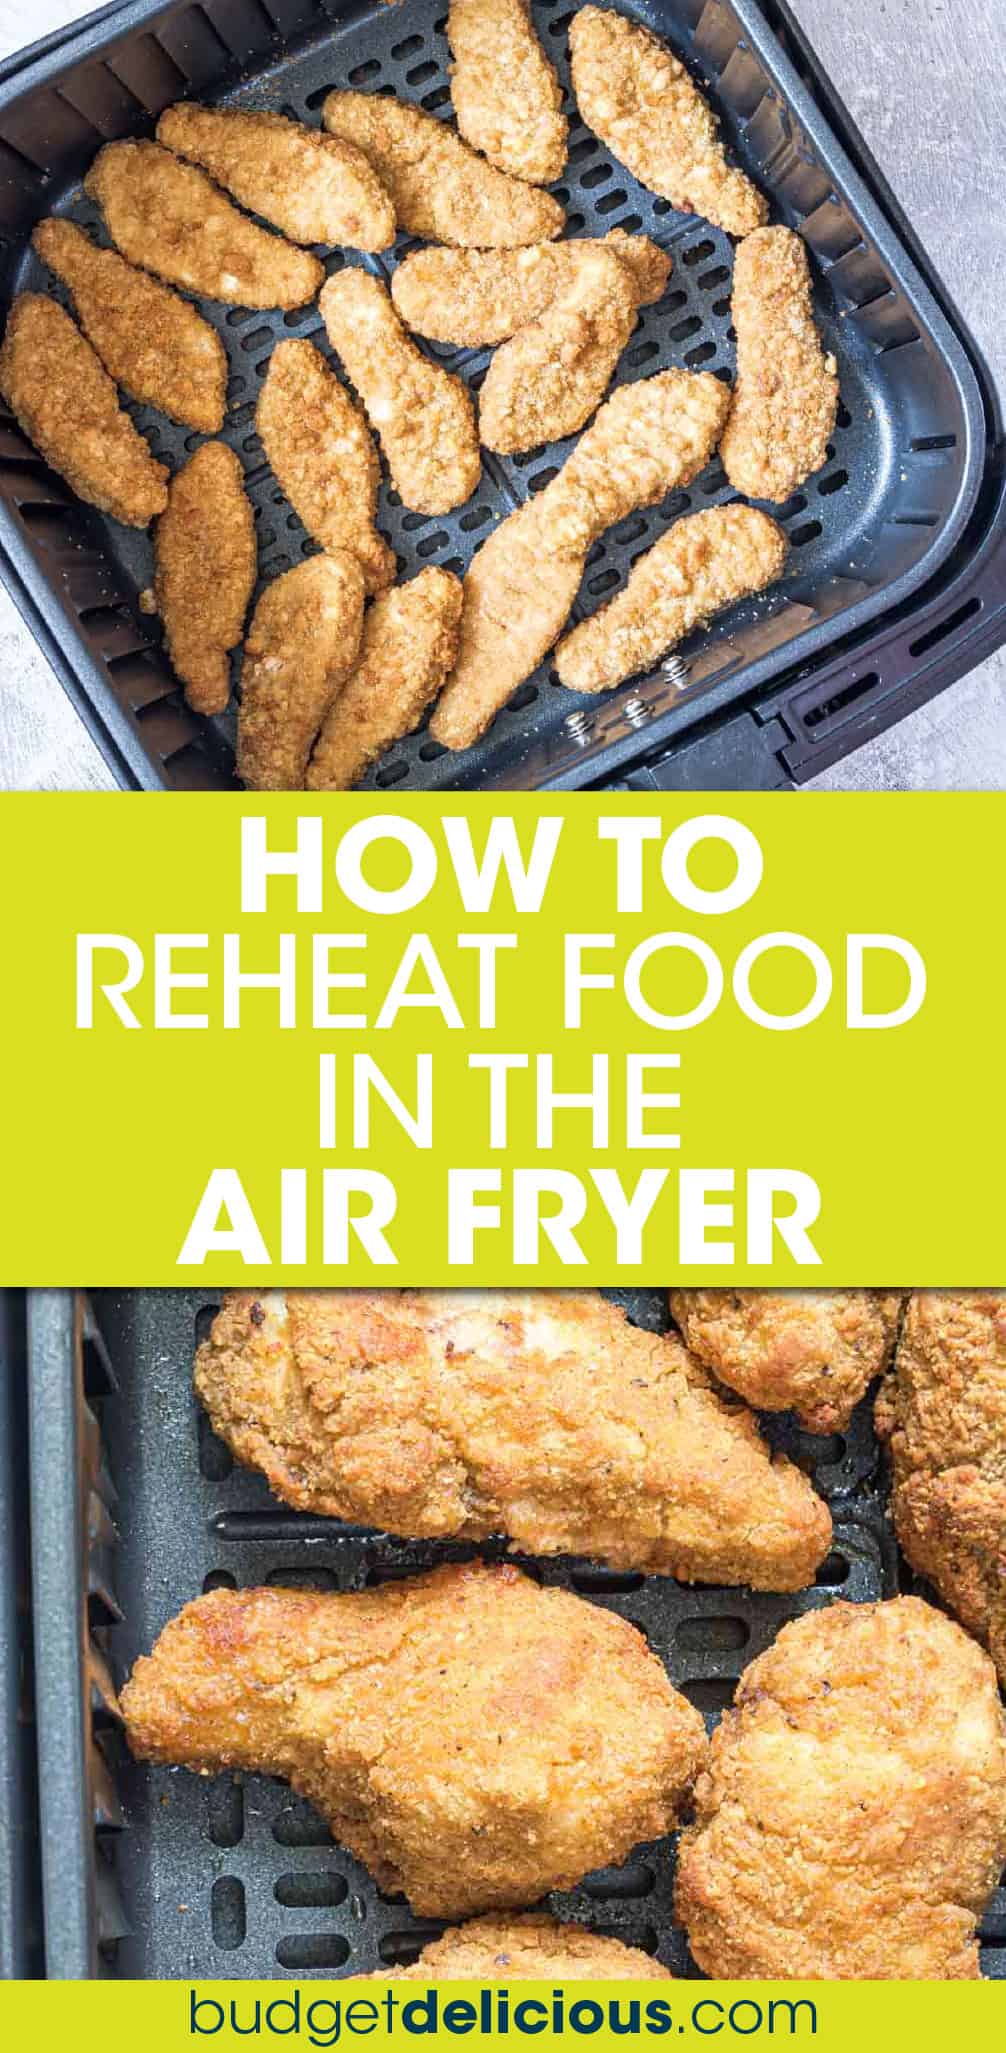 two pictures of chicken tenders and fried chicken in air fryer baskets